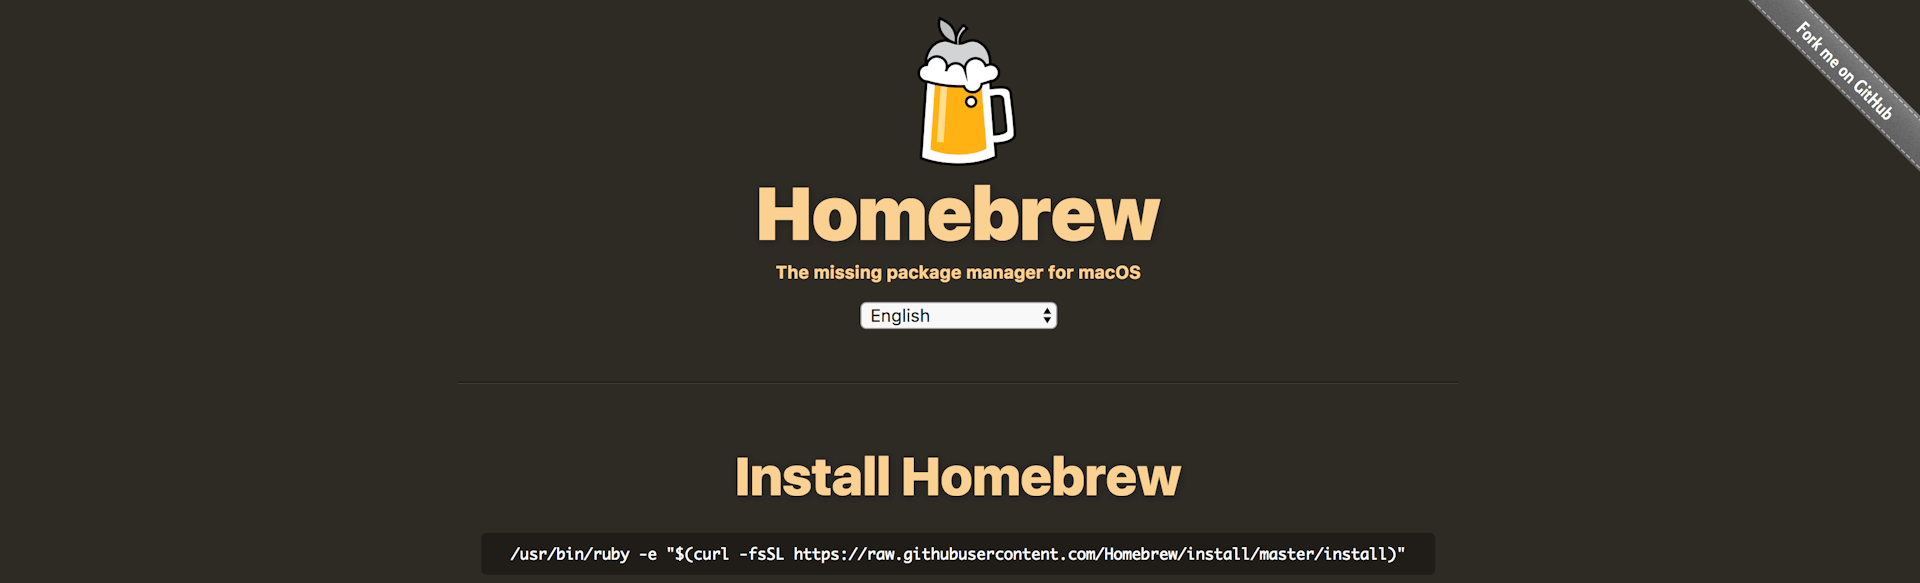 2017/02/getting-started-with-homebrew